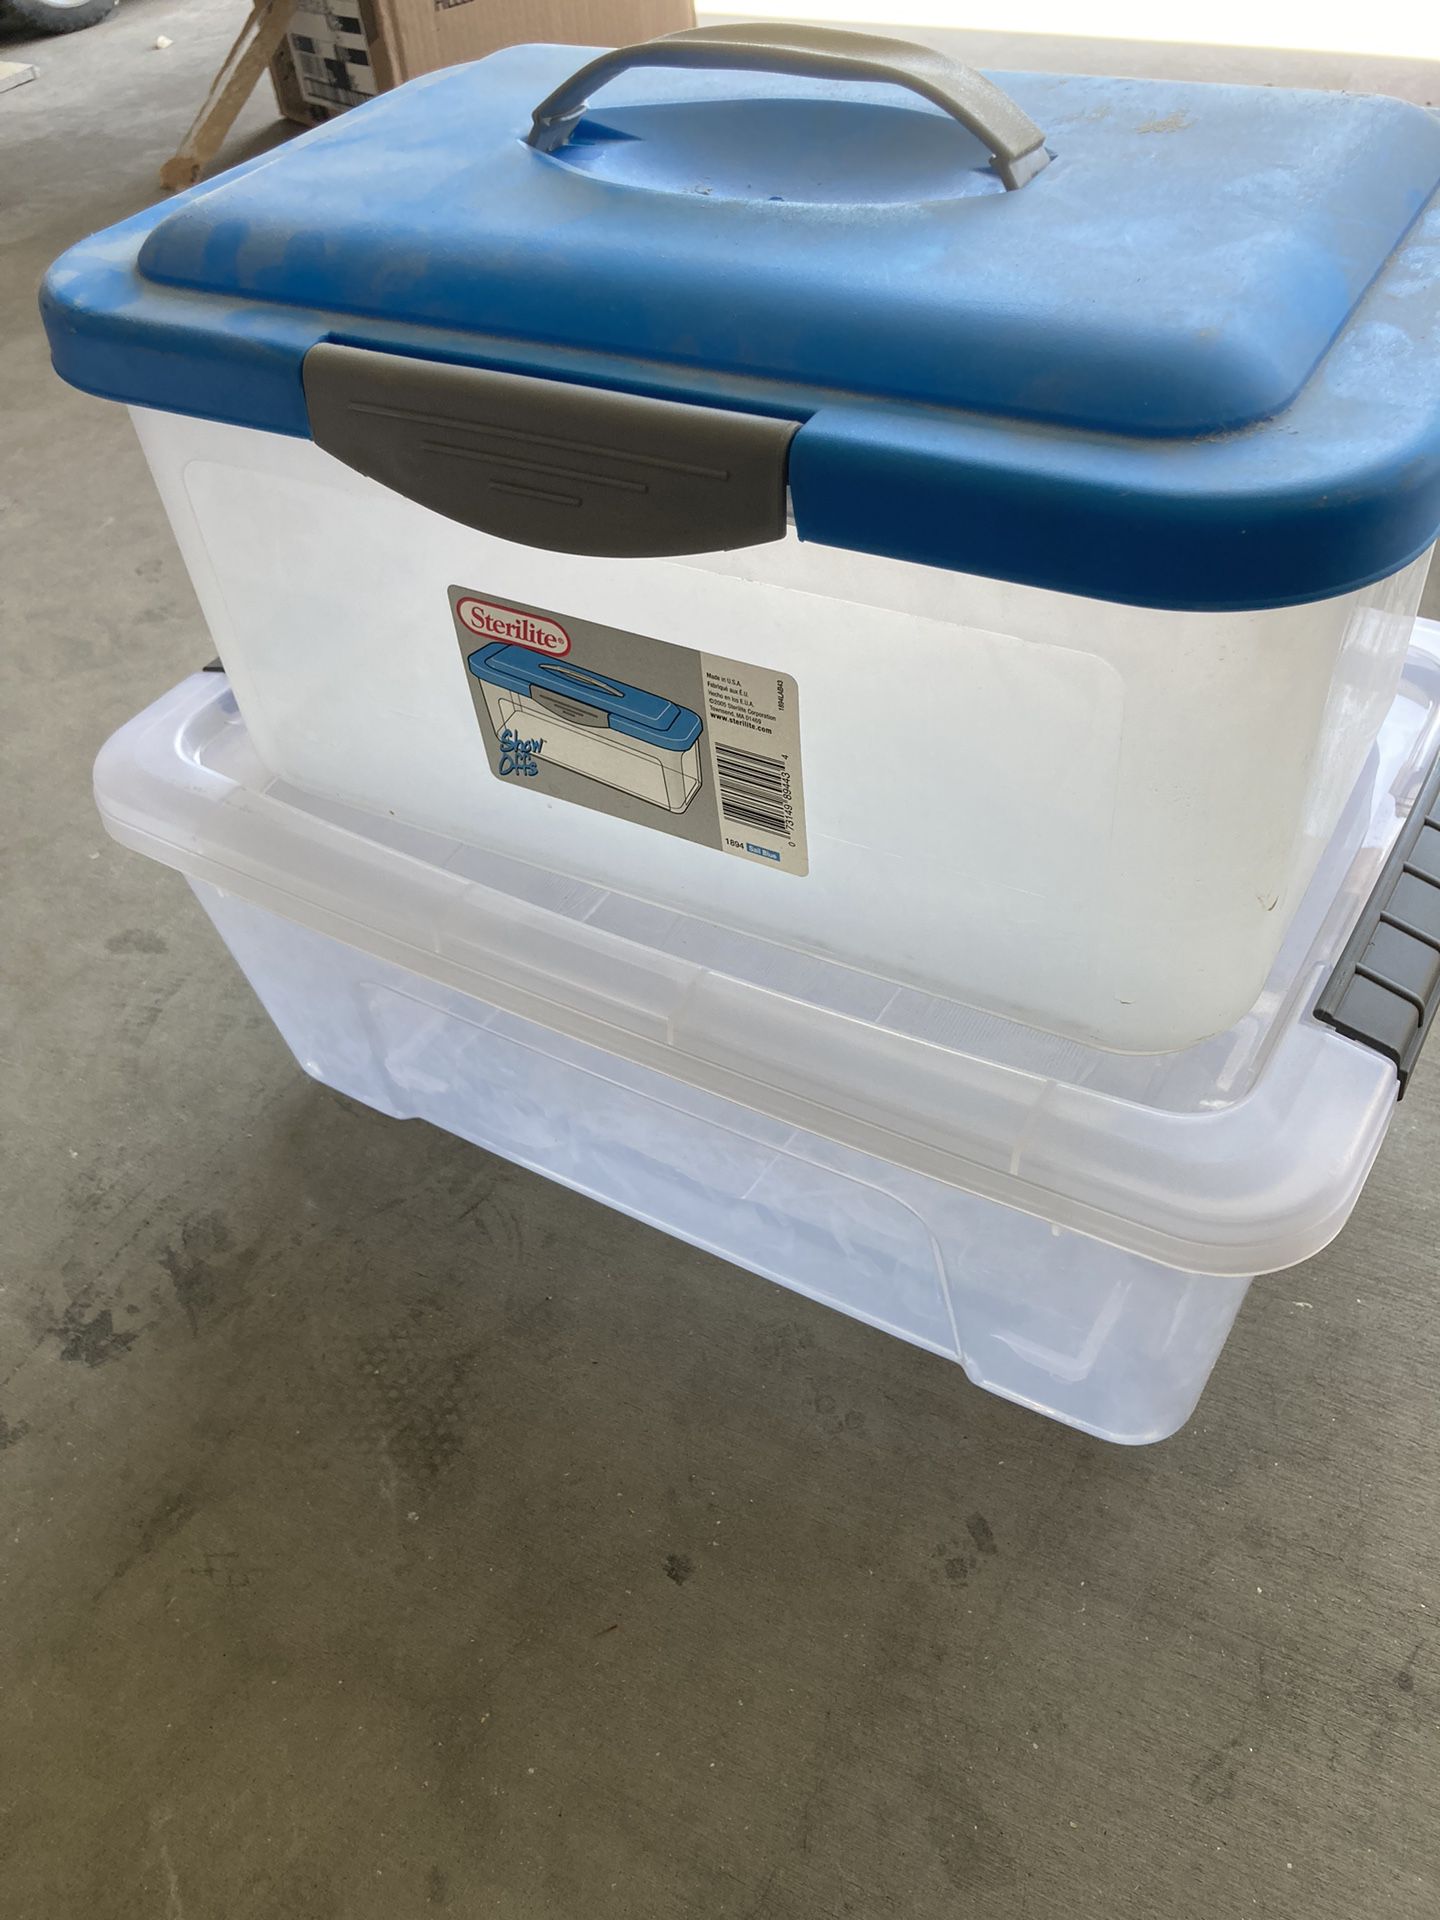 70 Gal. Tough Storage Tote with Wheels in Black with Yellow Lid for Sale in  Scottsdale, AZ - OfferUp